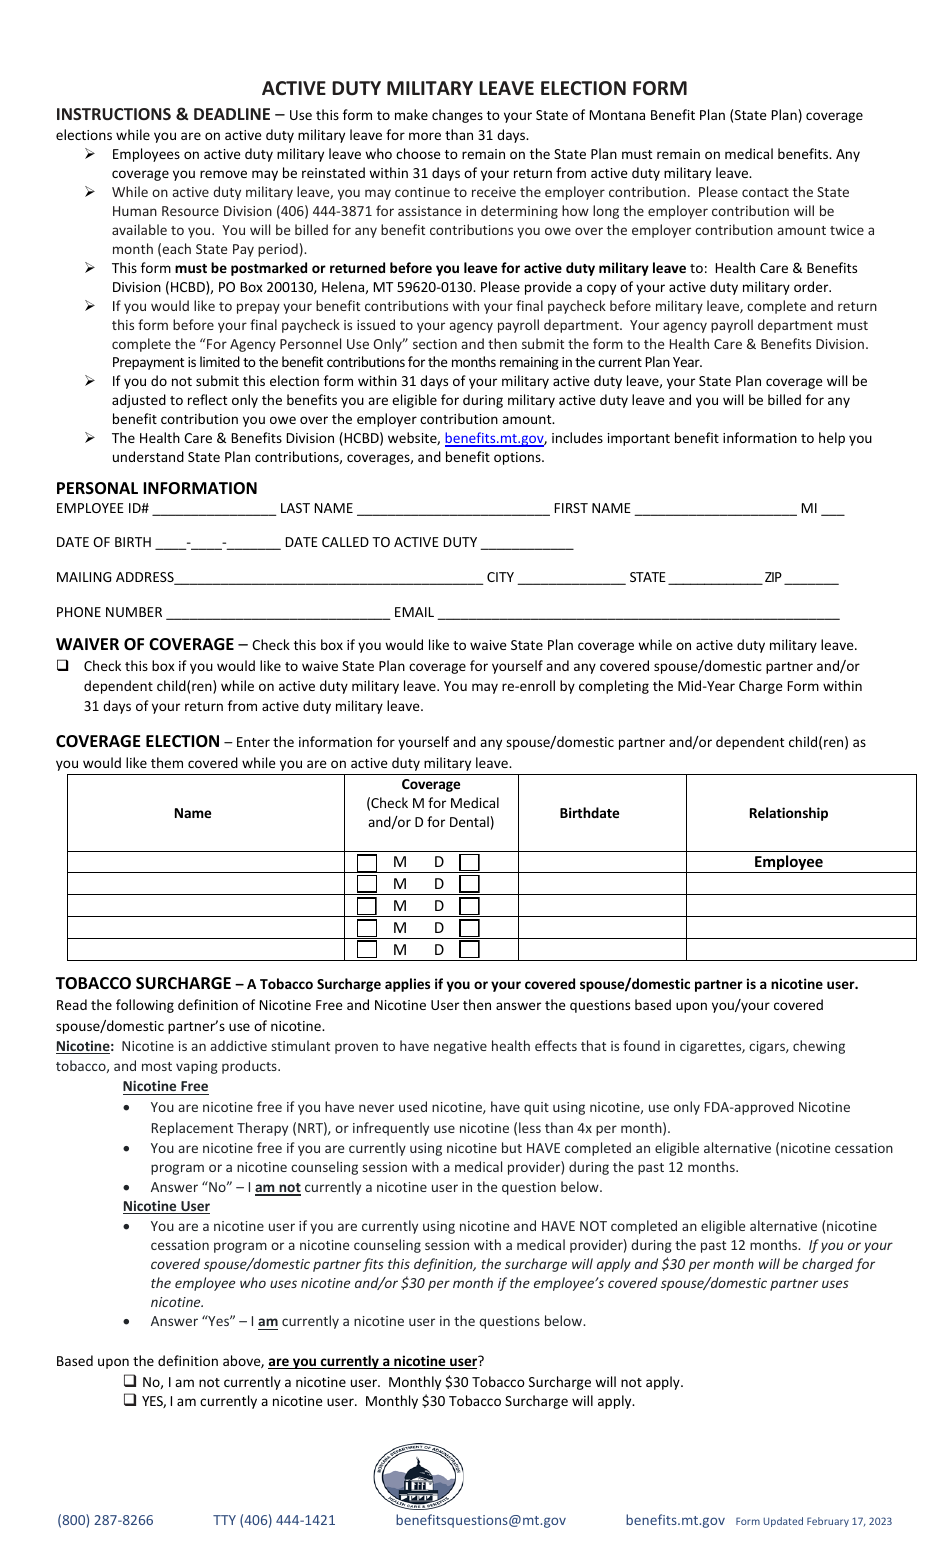 Active Duty Military Leave Election Form - Montana, Page 1